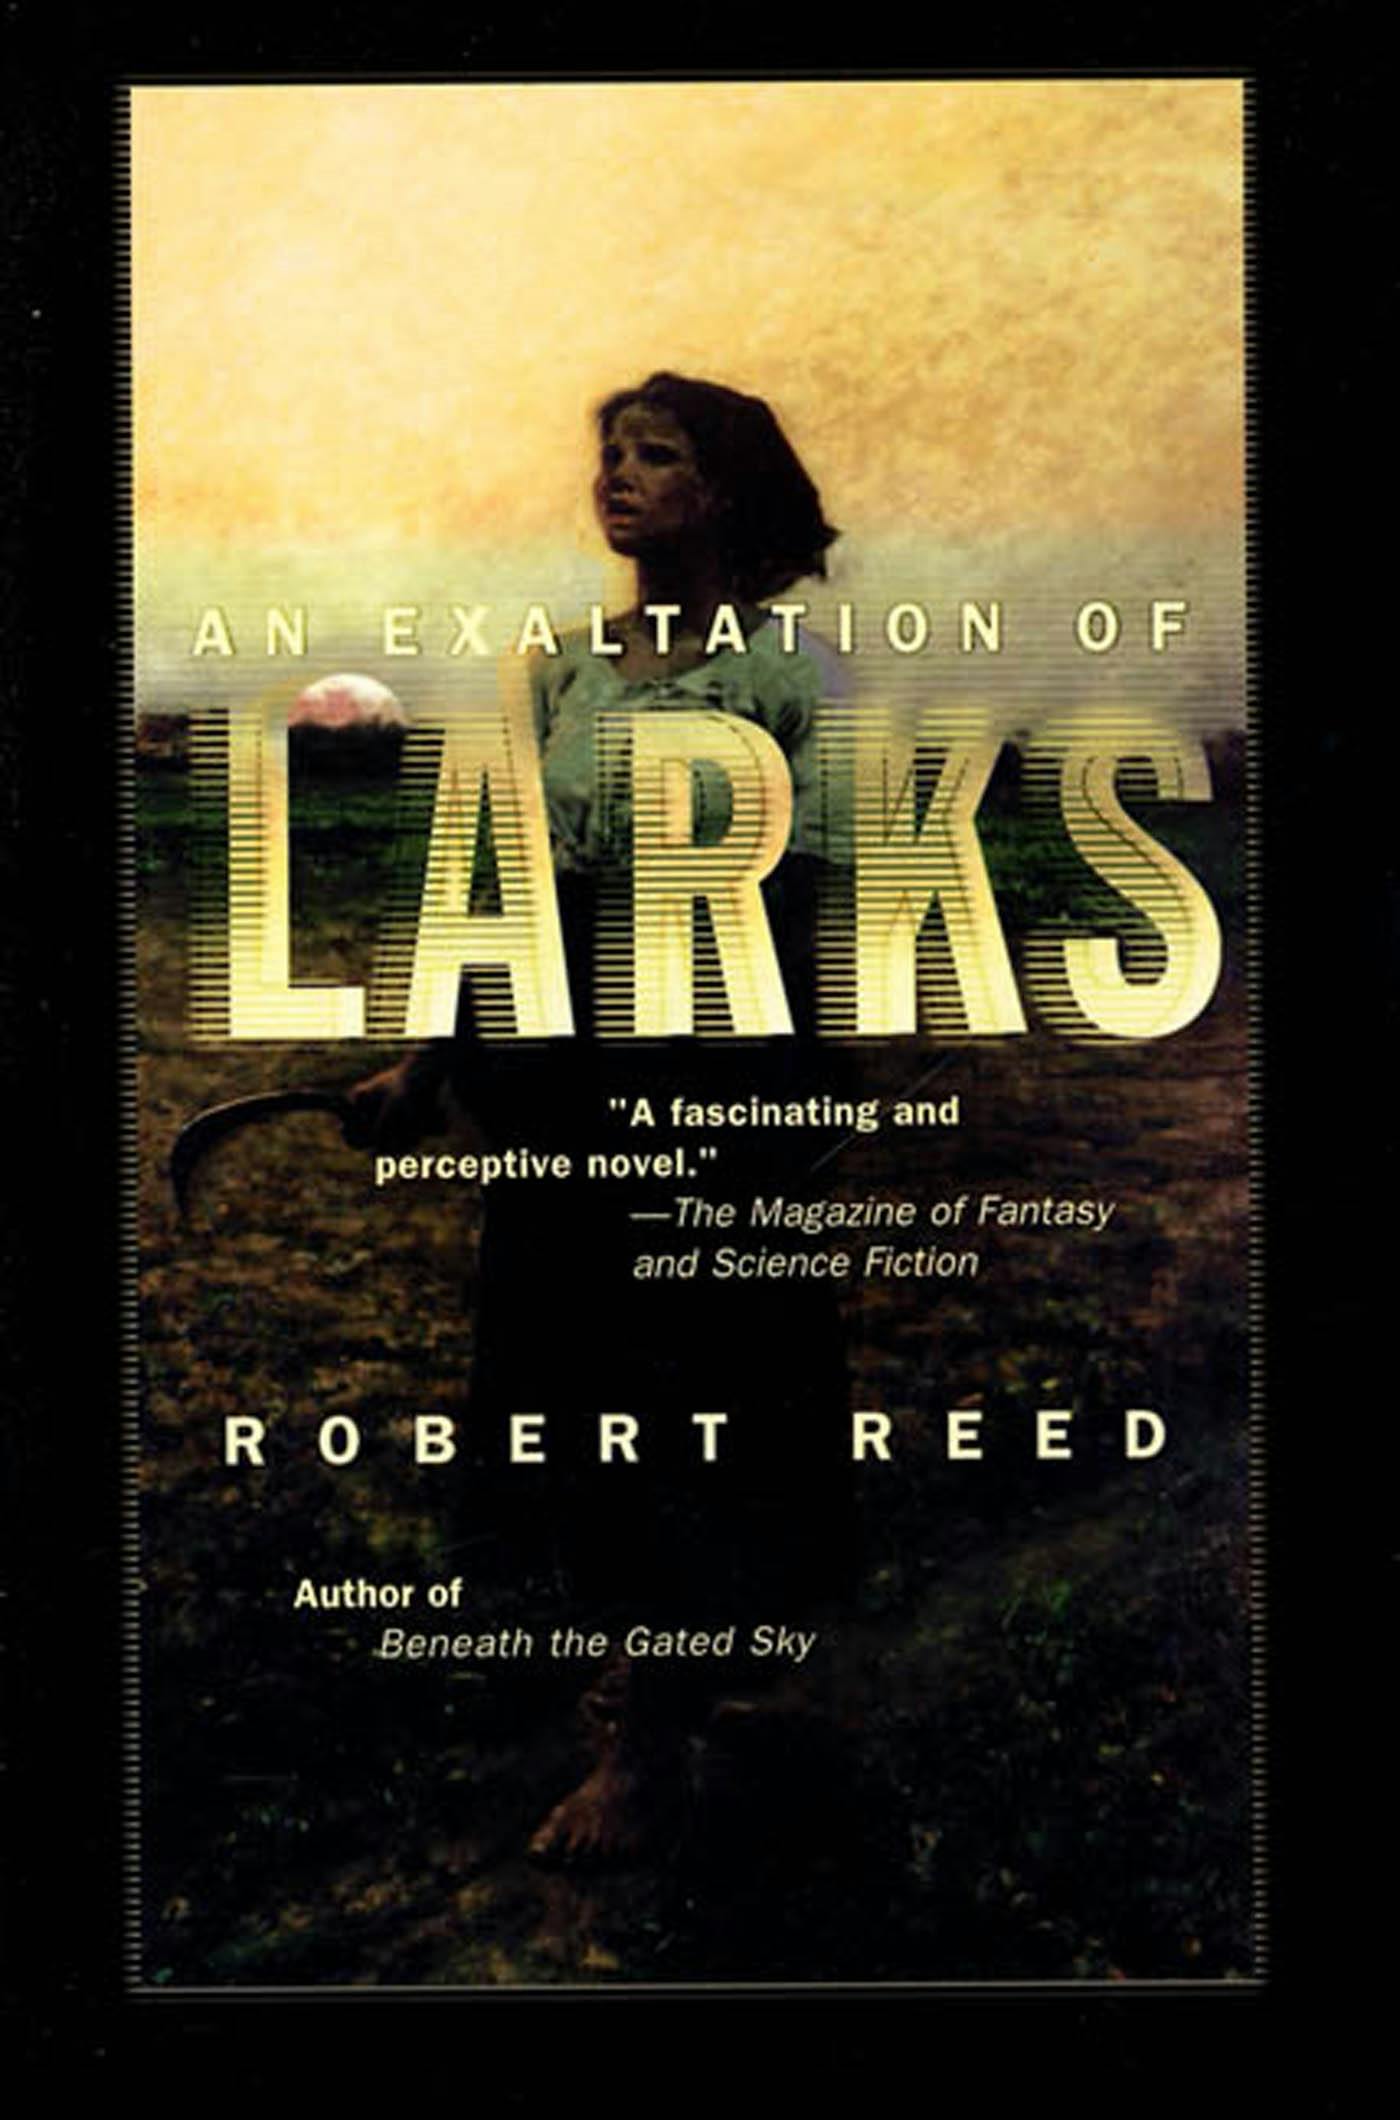 Cover for the book titled as: An Exaltation of Larks